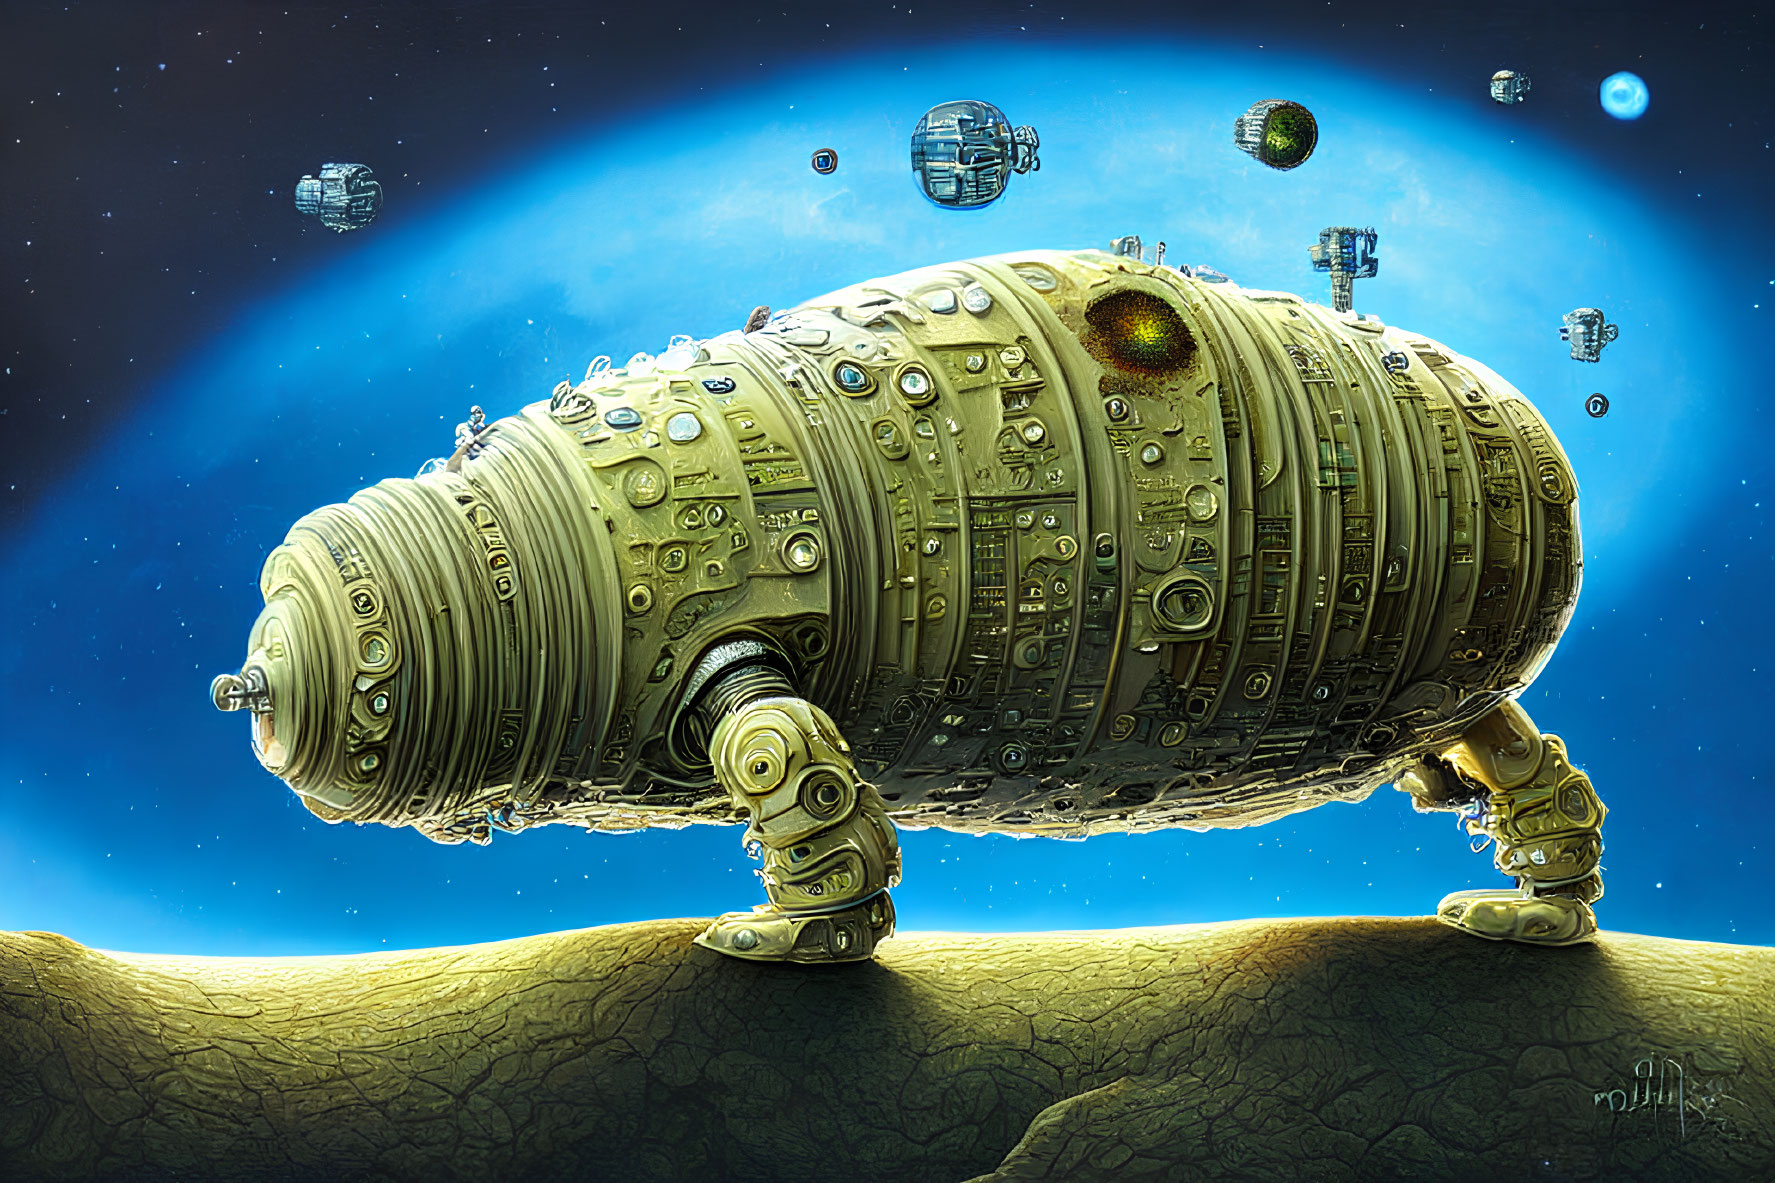 Whimsical robotic sheep on alien landscape with floating space stations